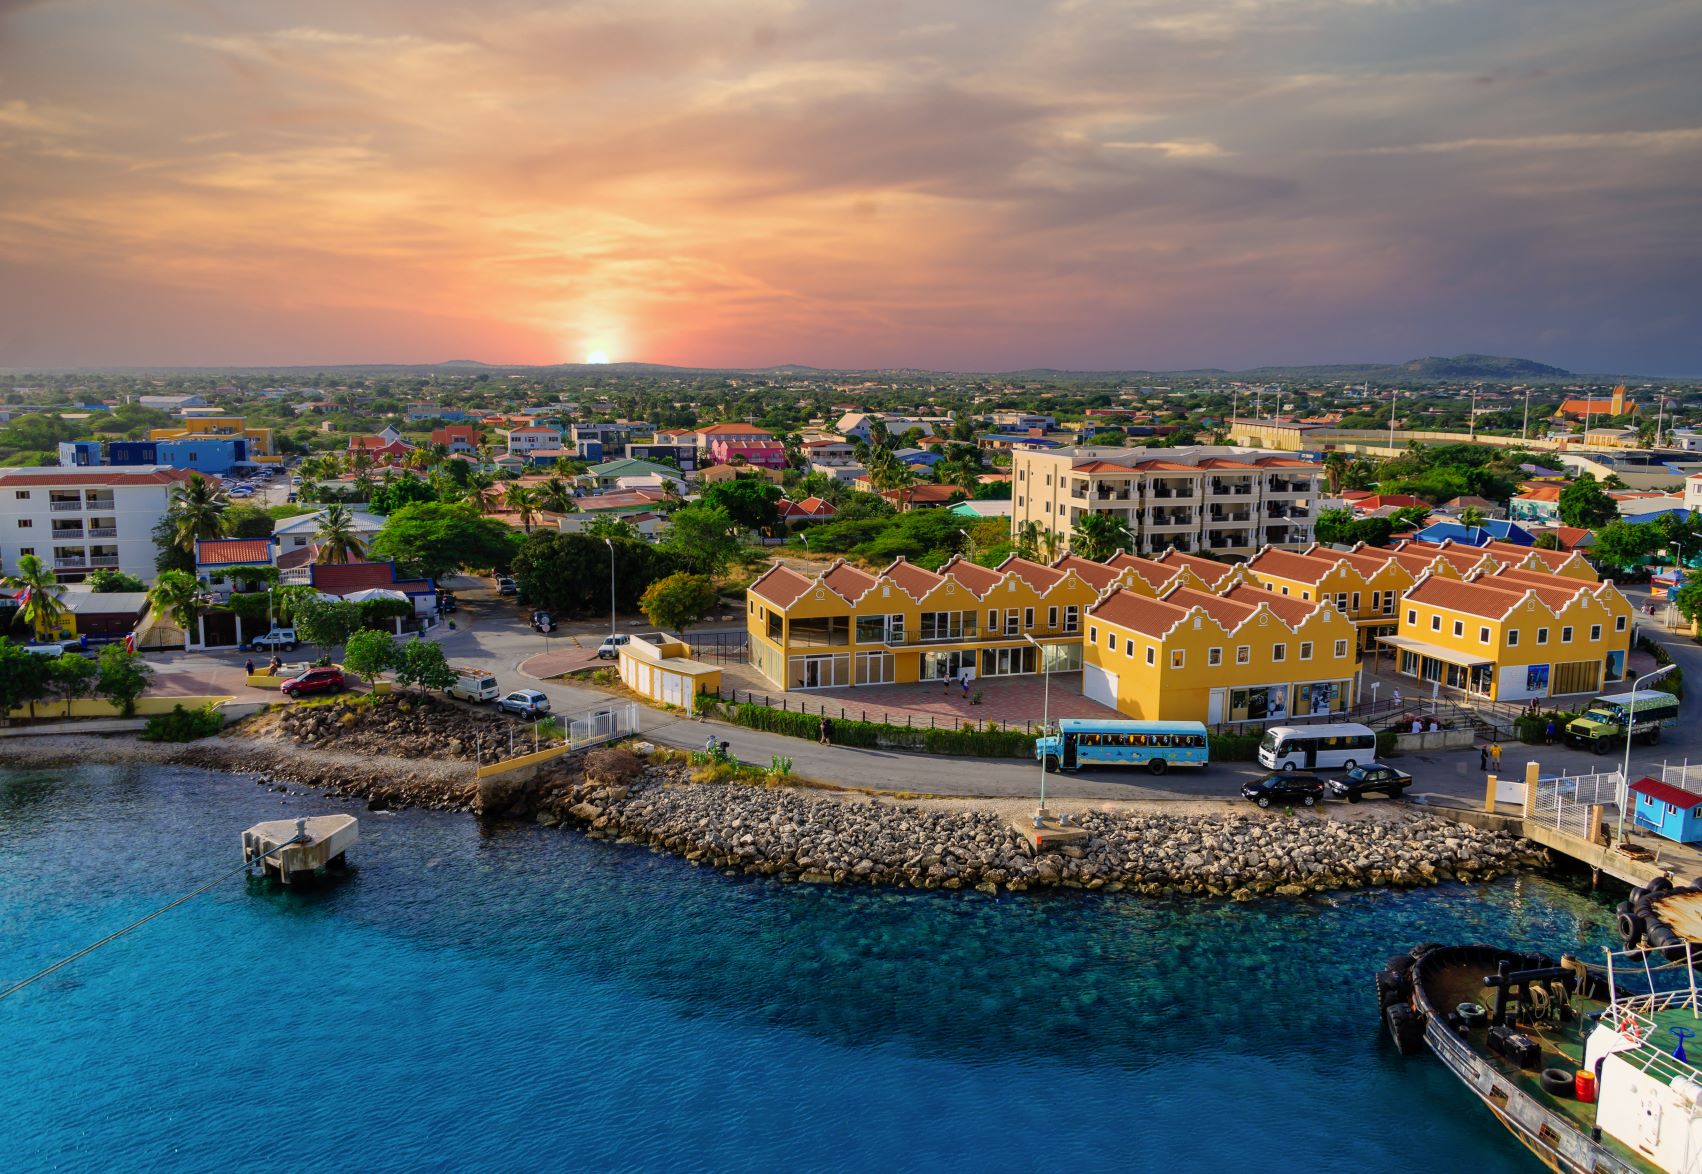 Colorful Waterfront and Harbor of Bonaire